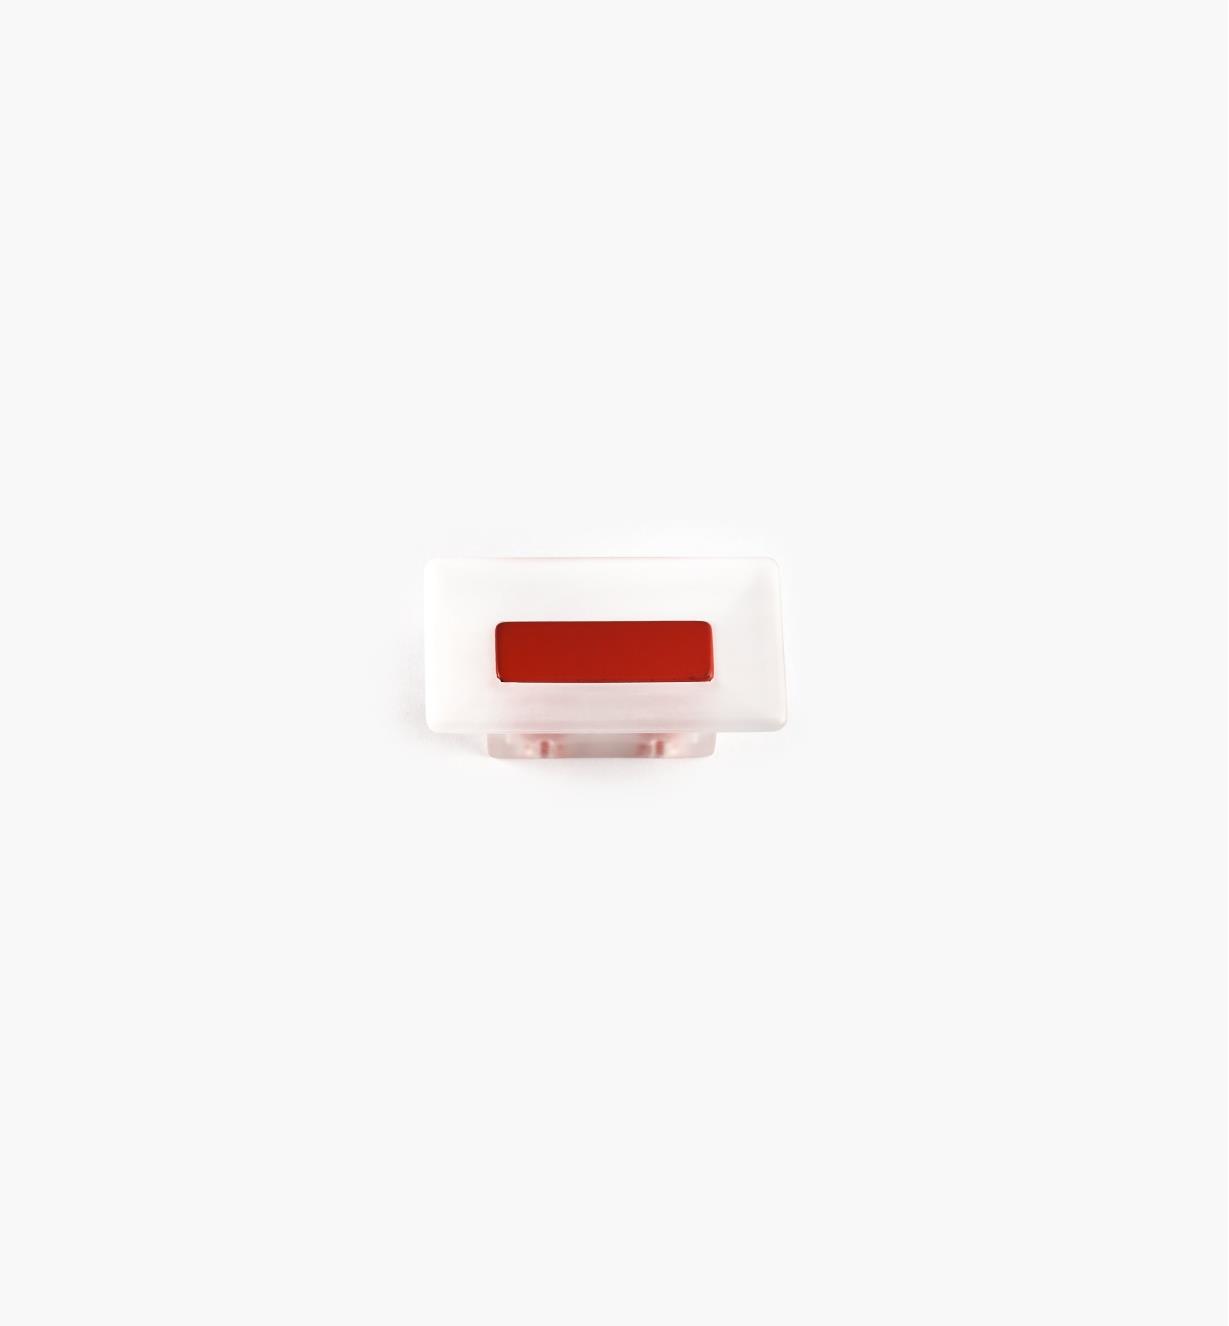 00W5431 - Bouton rectangulaire, 16 mm, série Bungee, rouge